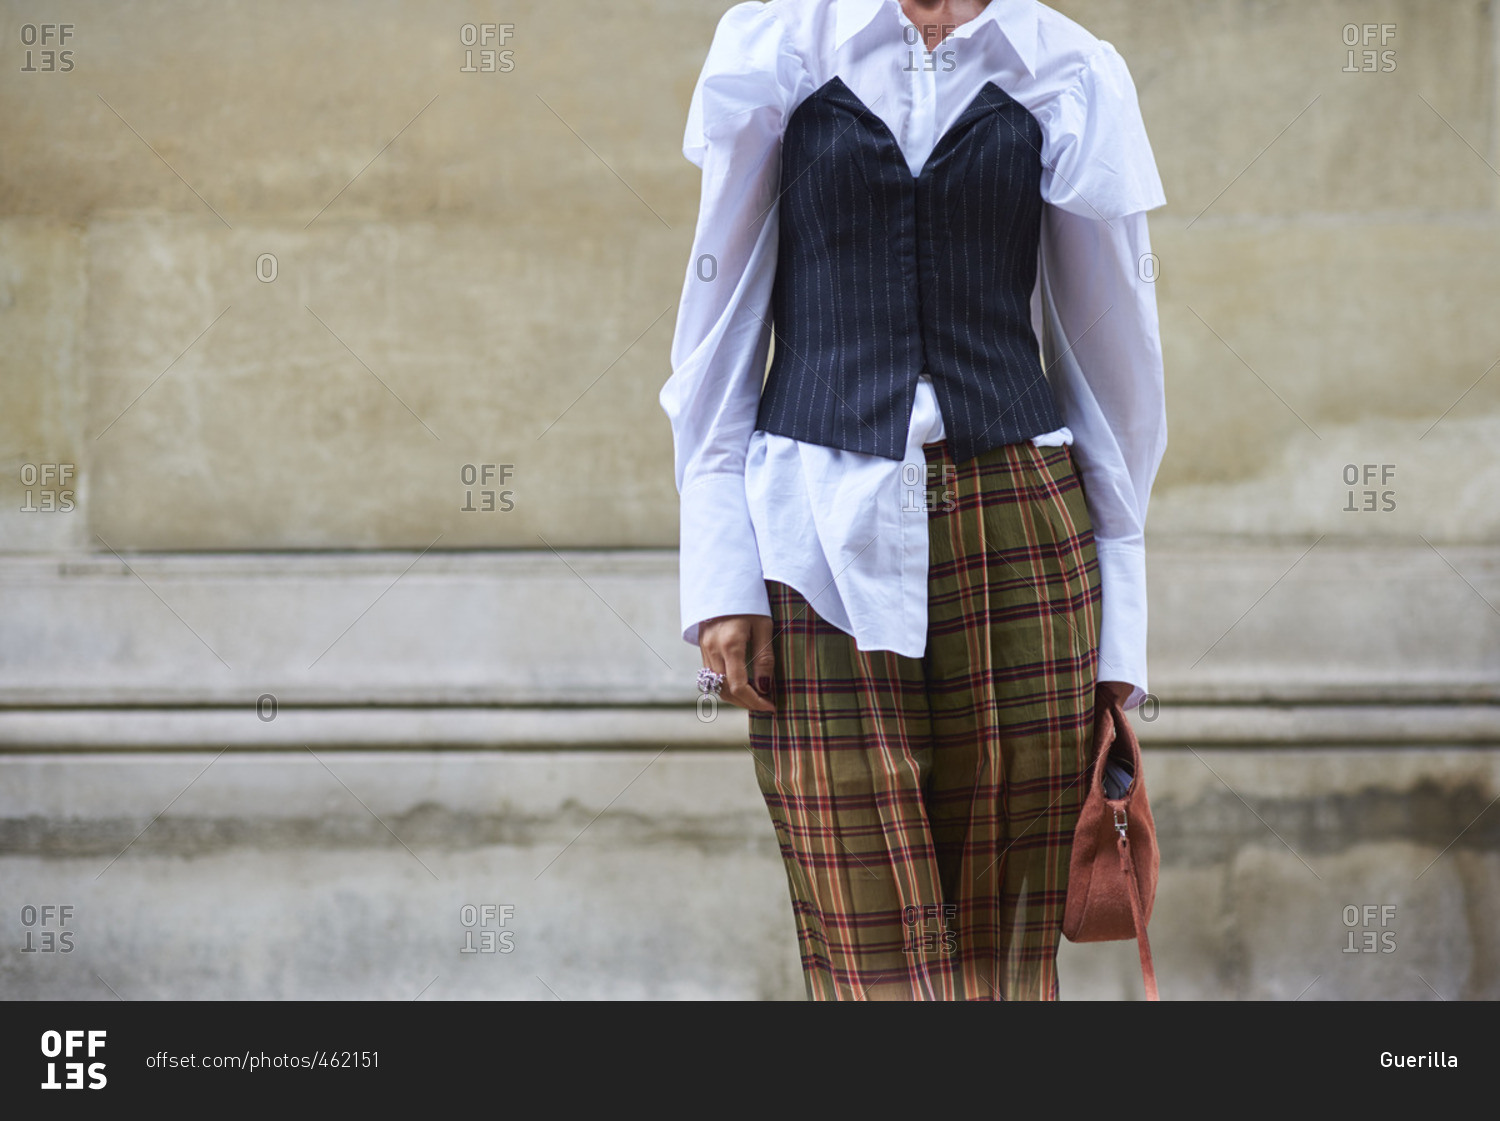 Woman in plaid trousers and bustier over white shirt